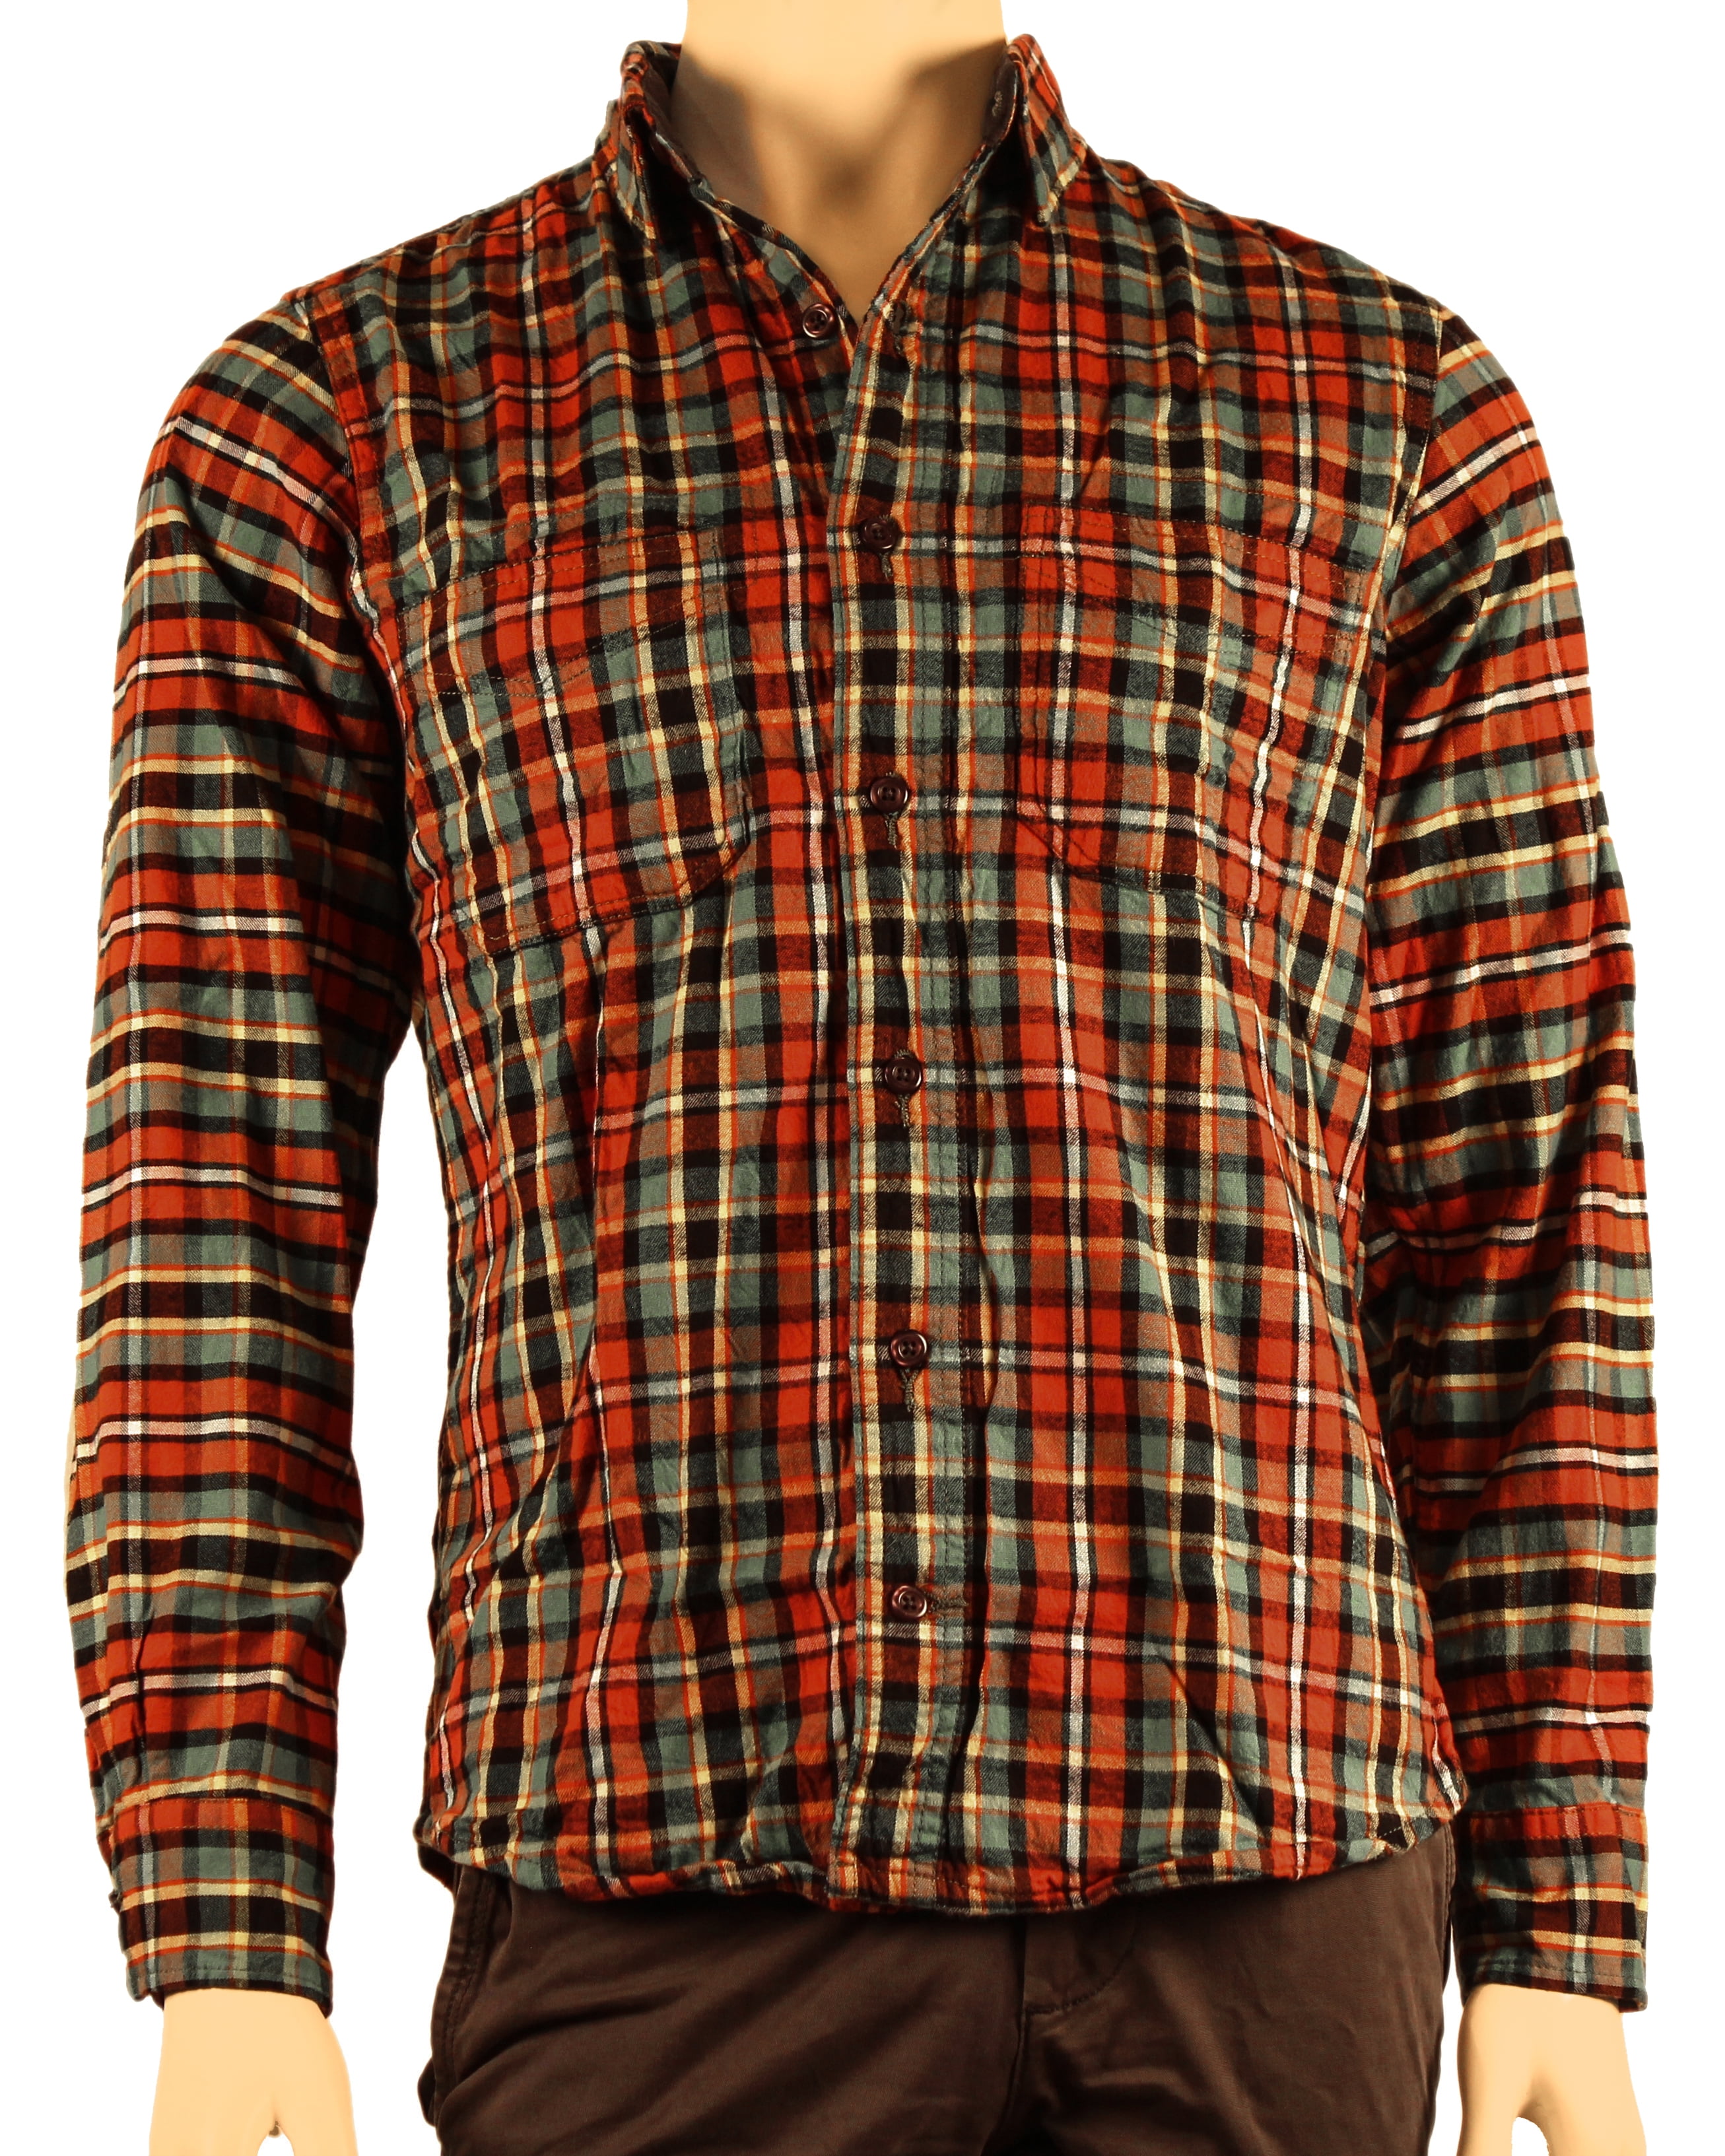 Maks Men S Flannel Shirt Two Ply 100 Cotton Pre Washed Vintage Look Plaid Work Shirt